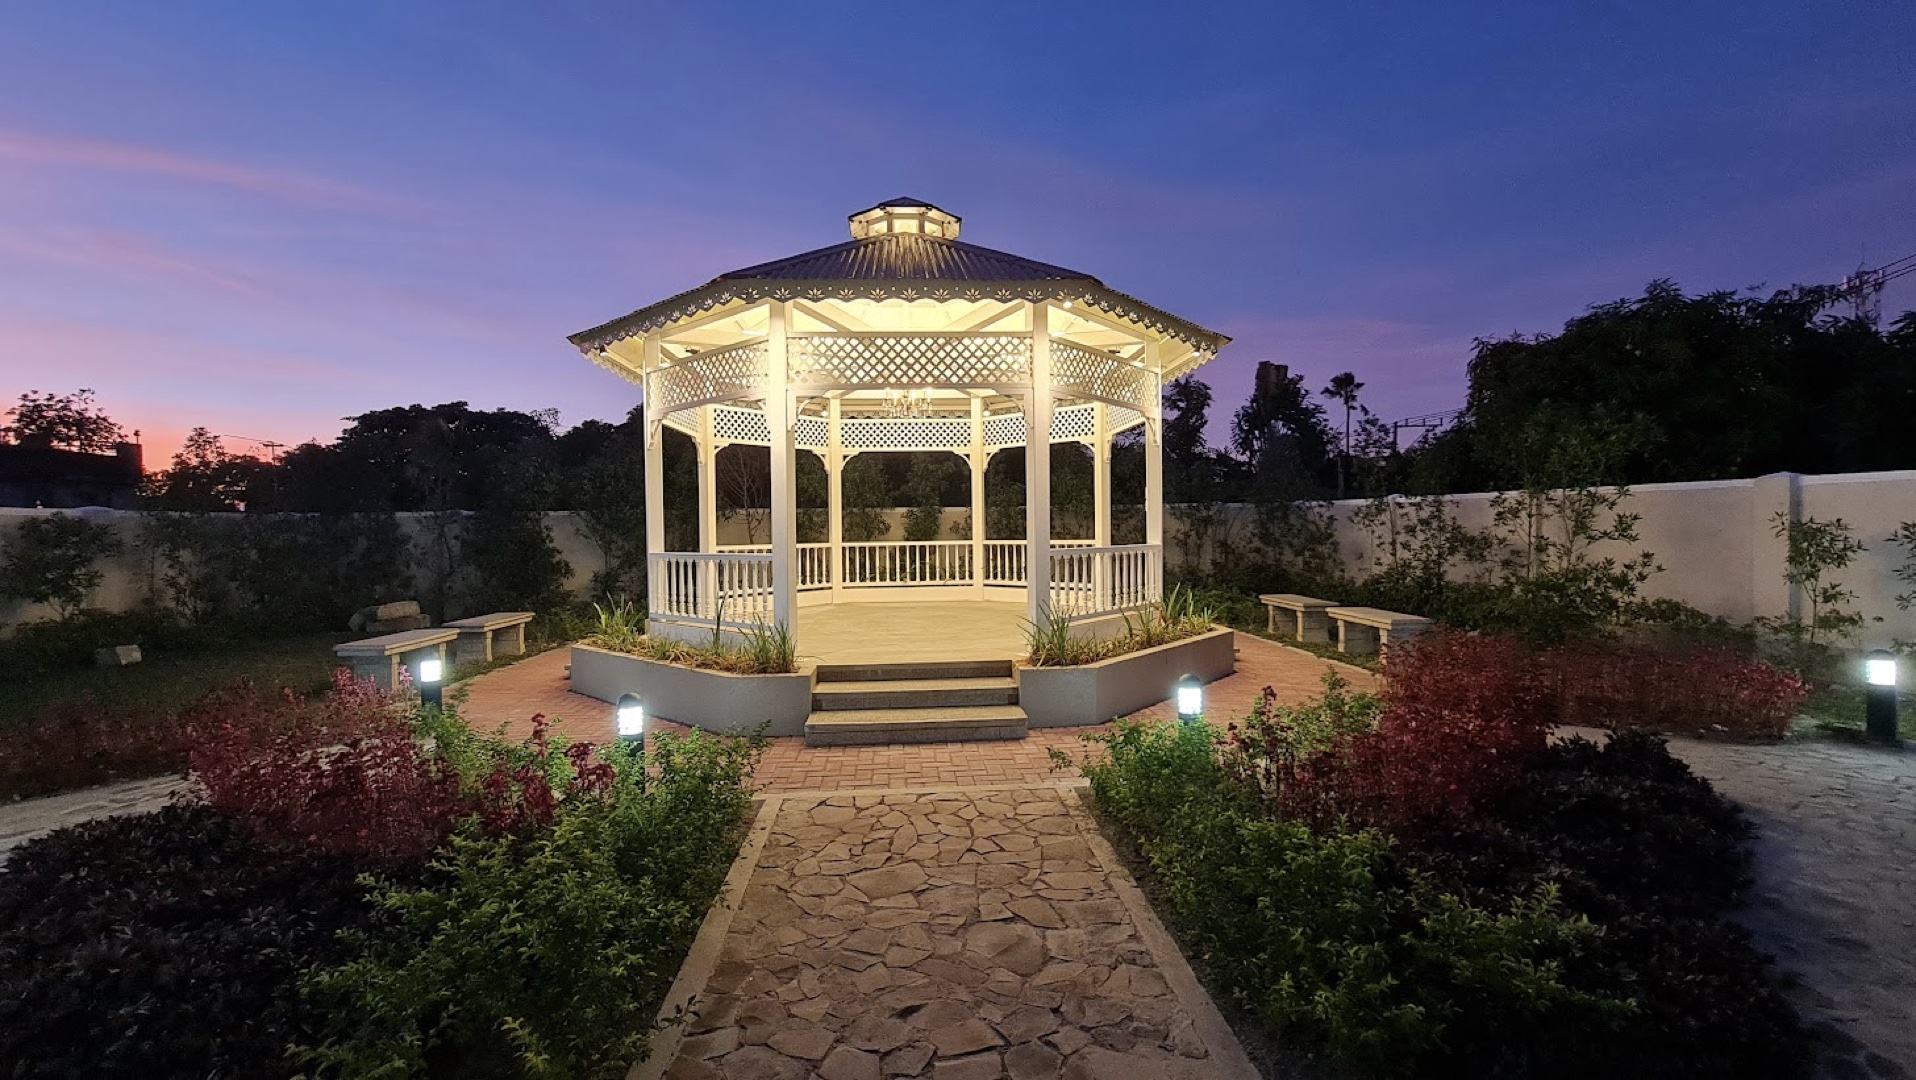 A gazebo in the middle of large garden.